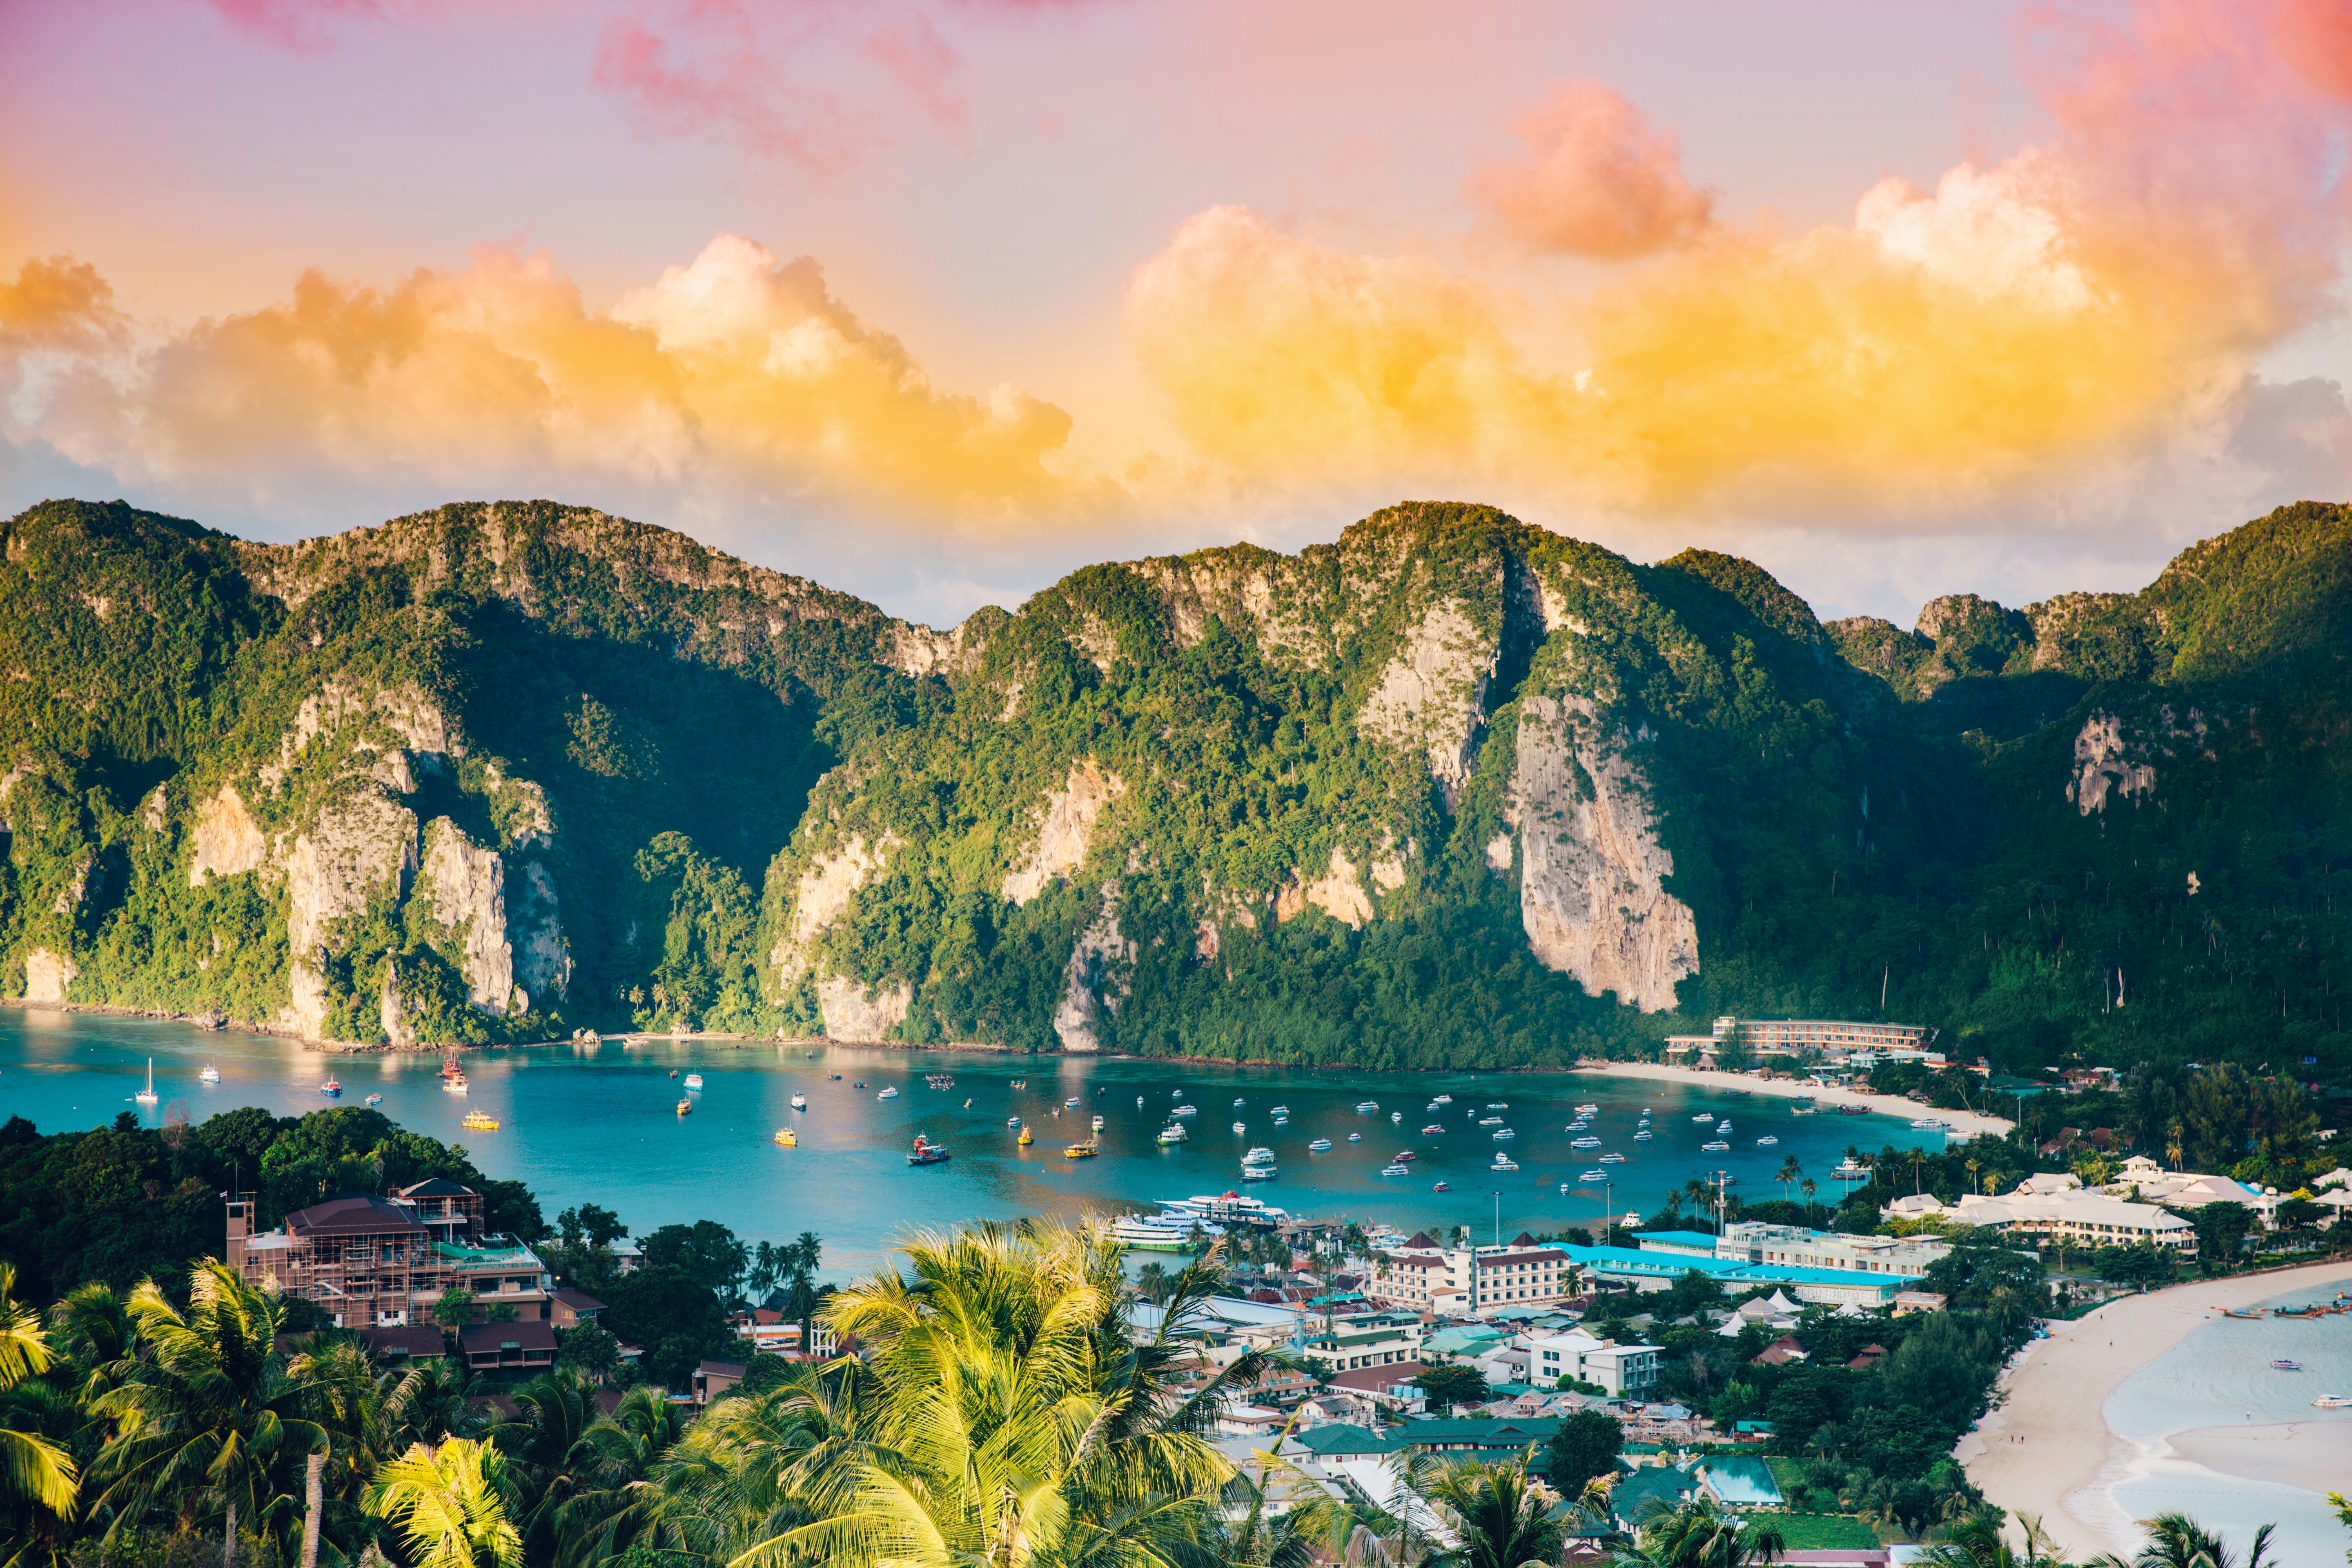 We hiked to the viewpoint at sunrise on Phi Phi Island to catch this marvelous dream of a sight.